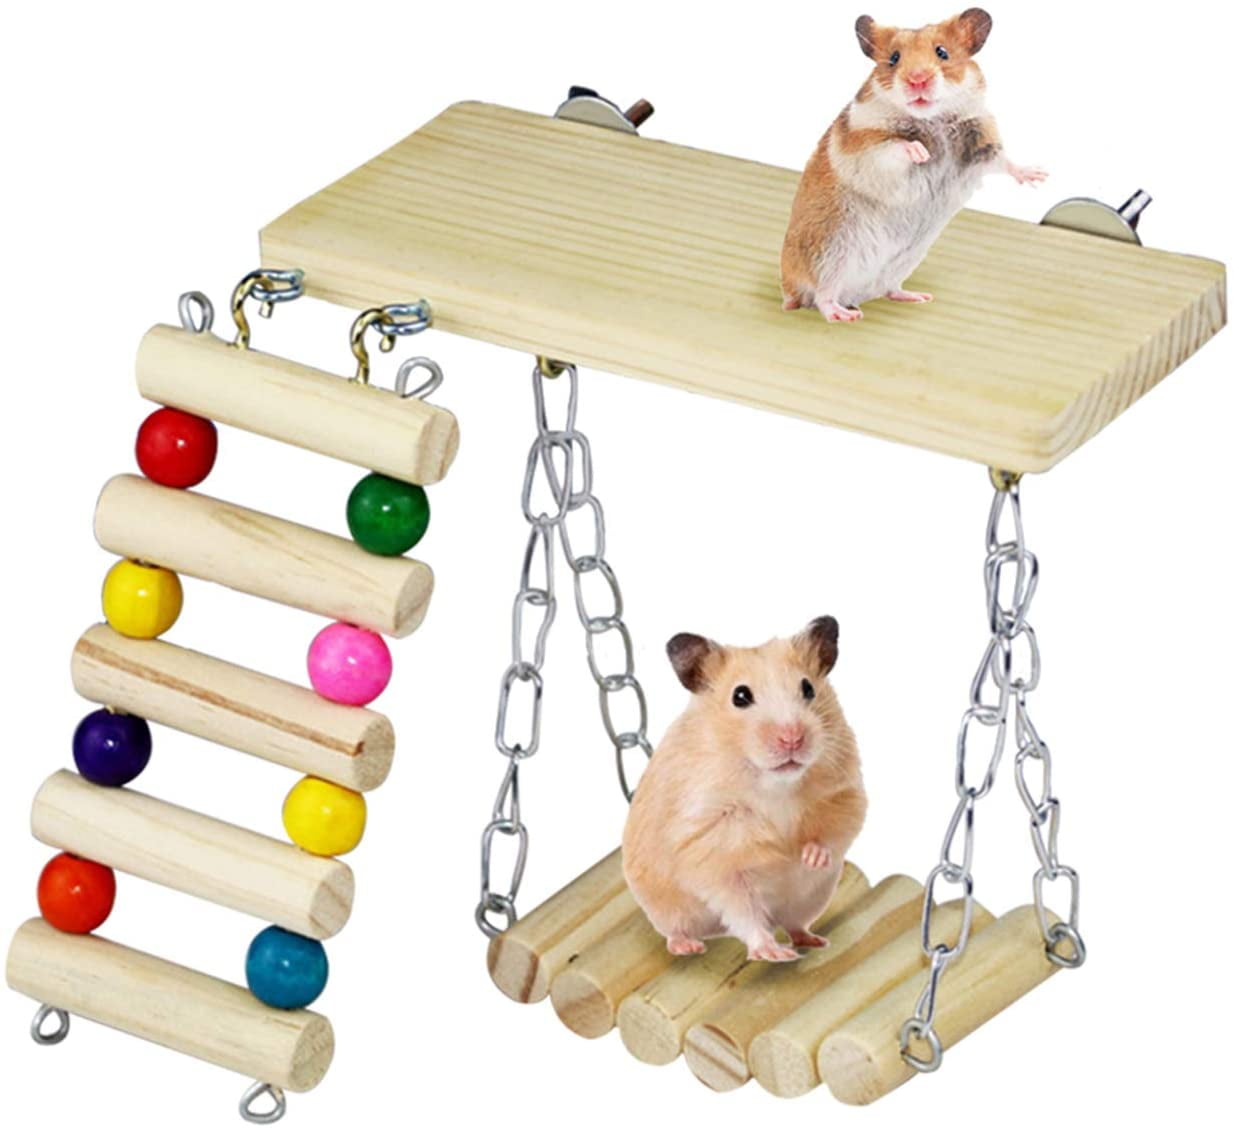 Hamster Hanging Chew Toy Small Animal Hanging Toy